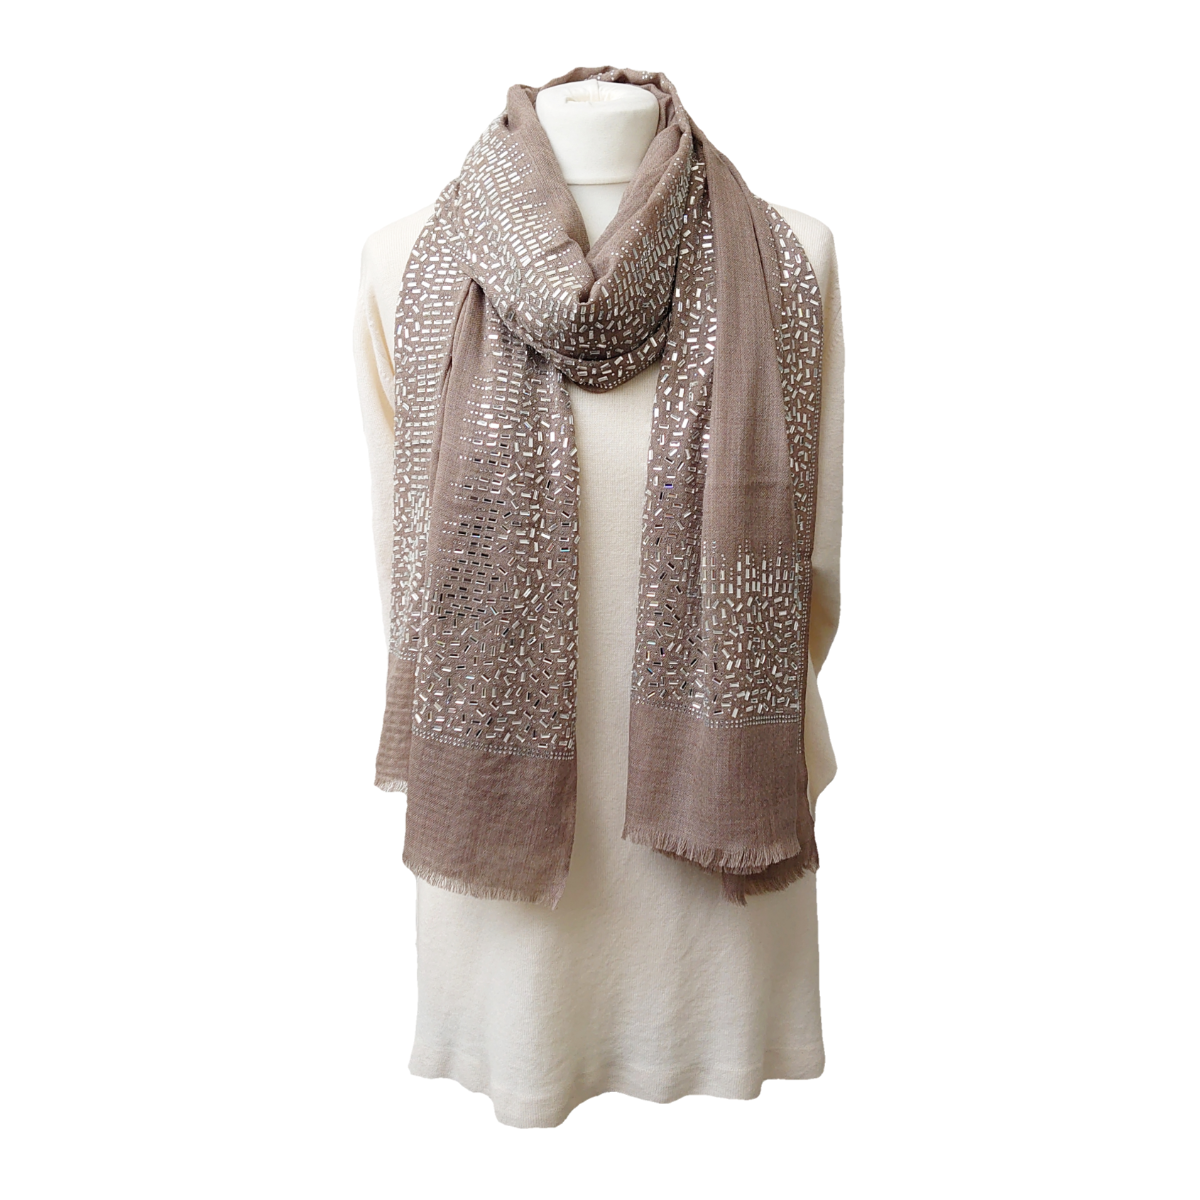 Exclusive, Limited Edition Luxury Pashmina Stole With Crystals - Taupe-Silver